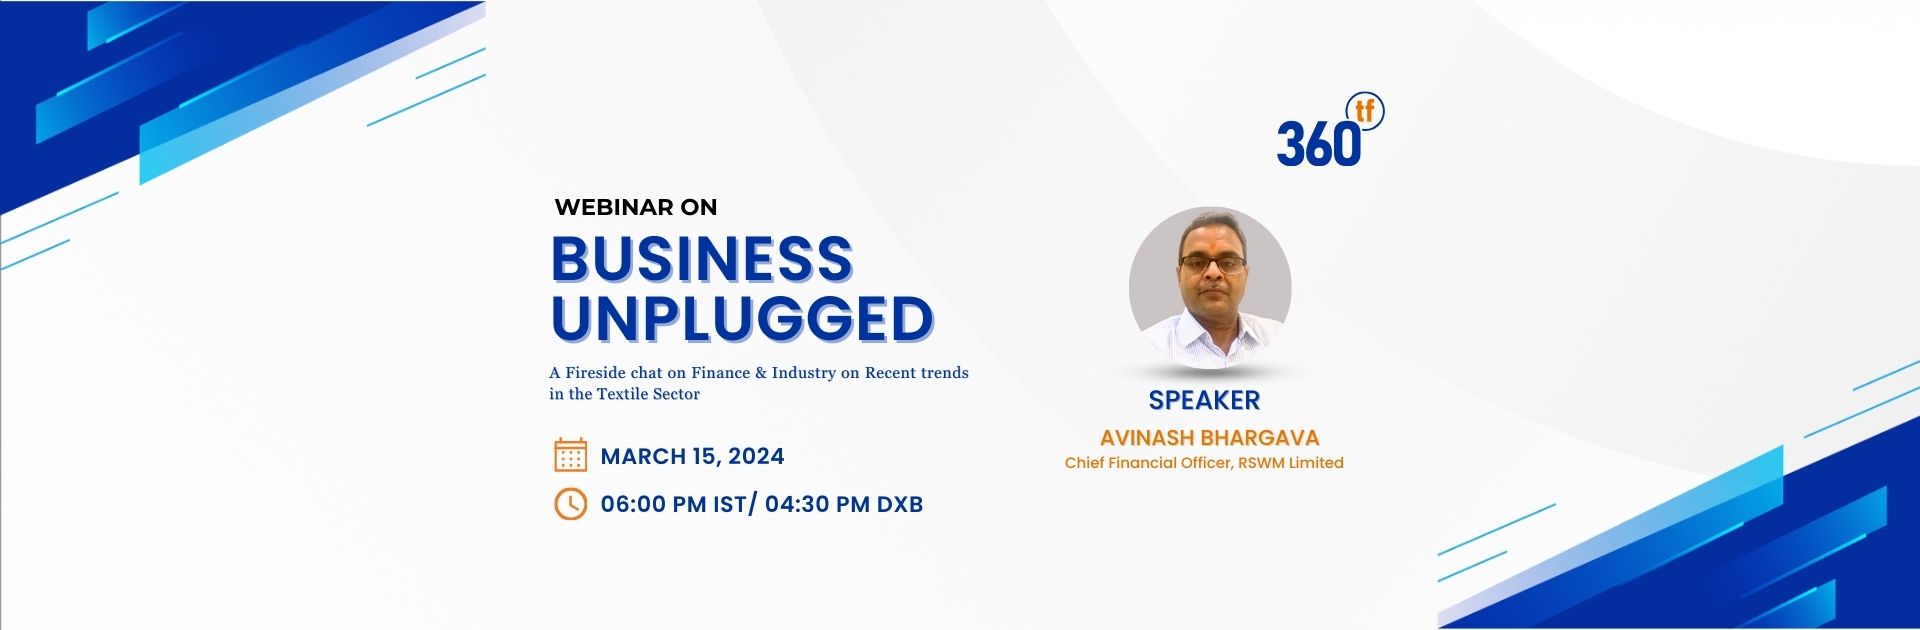 Business Unplugged – Fireside chat on Finance & Industry on Recent trends in the Textile Sector